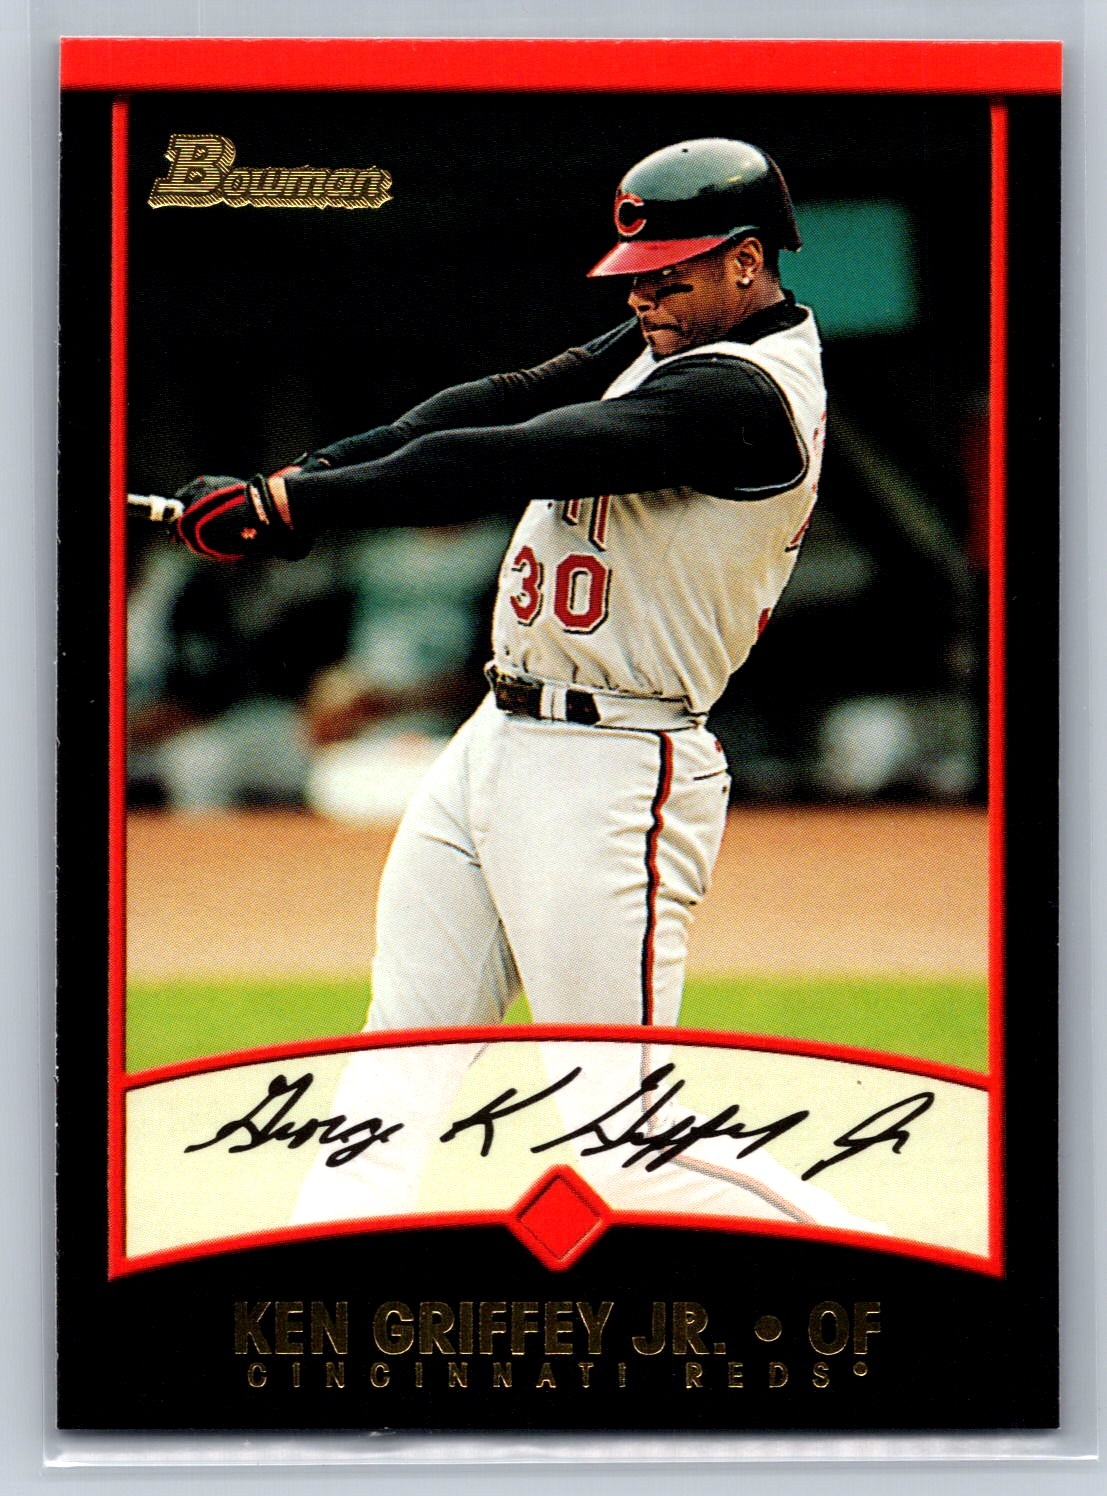 Primary image for 2001 Bowman #135 Ken Griffey Jr.